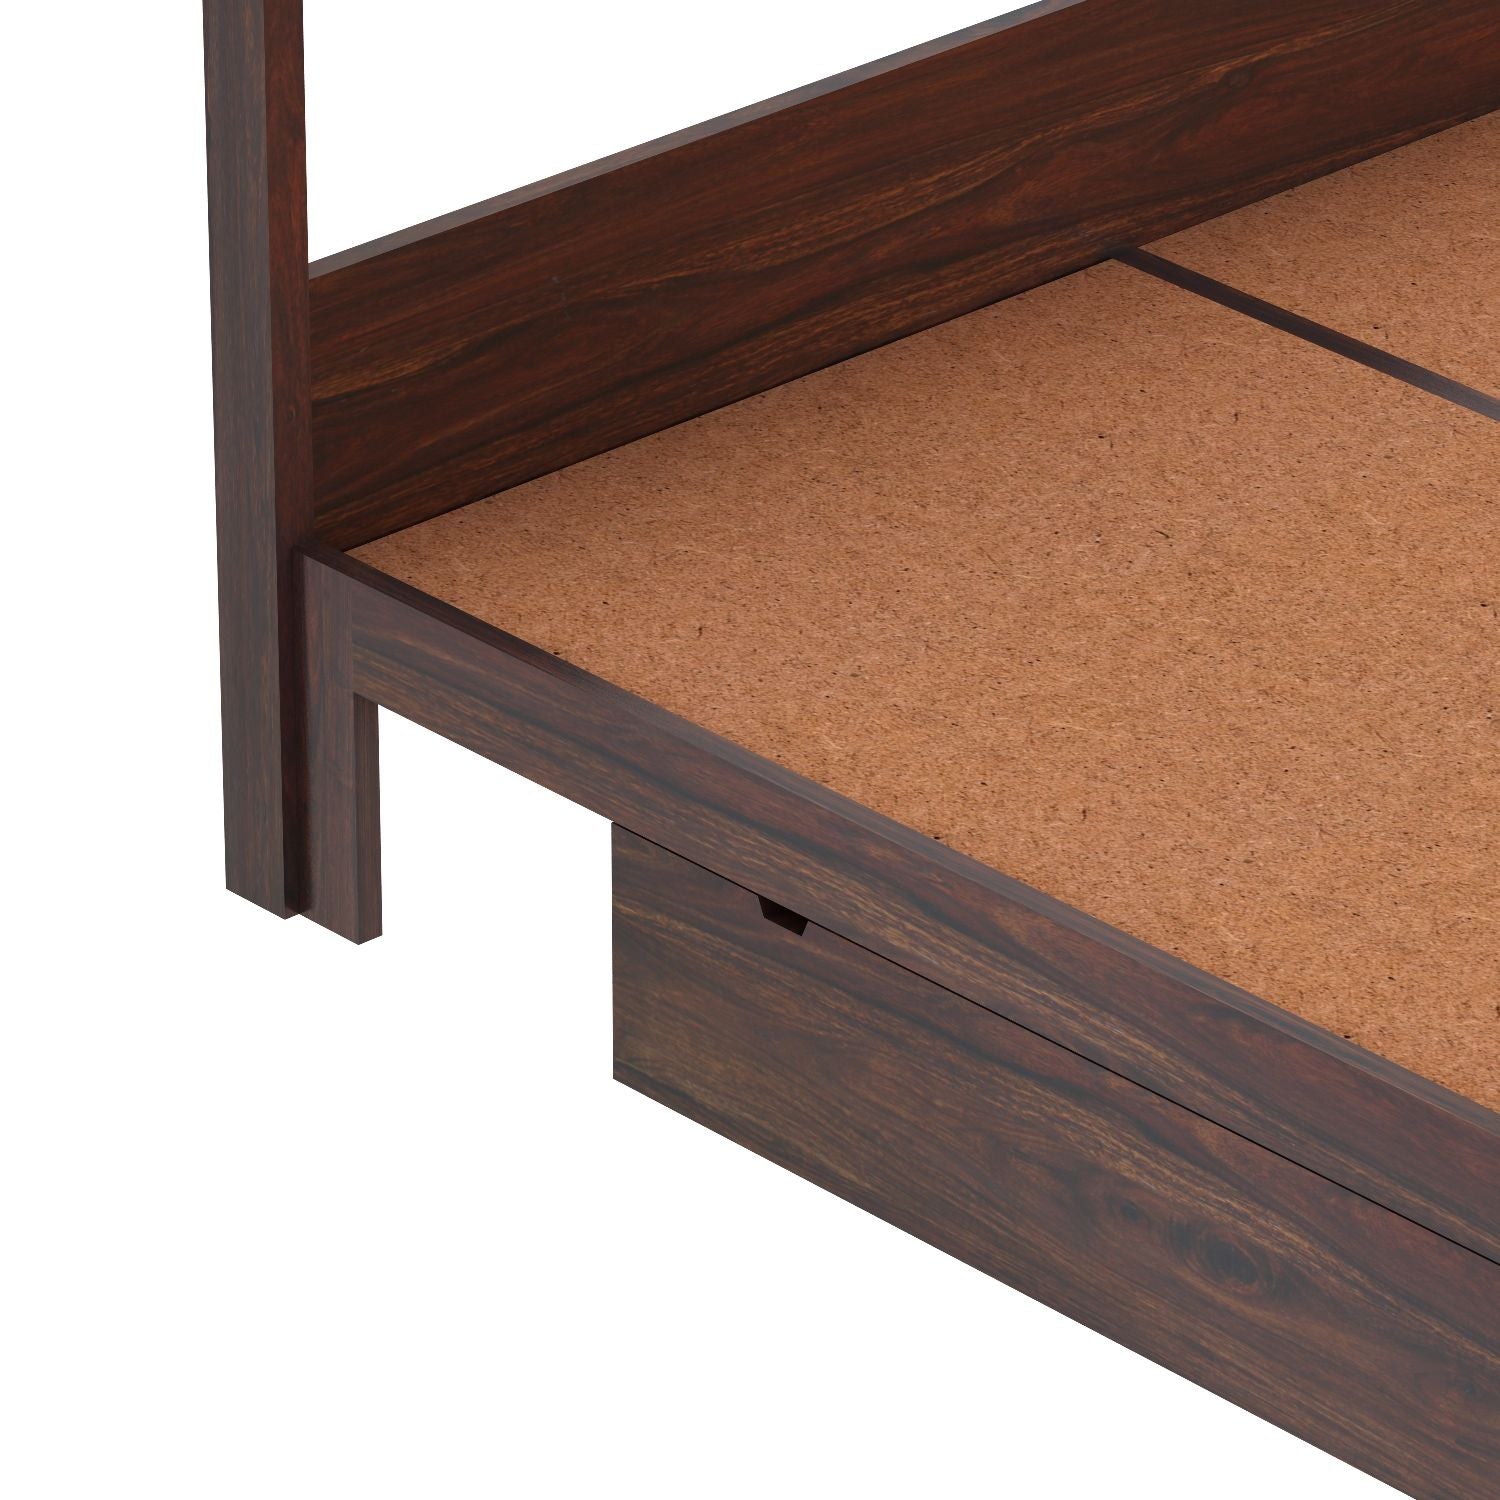 Solivo Solid Sheesham Wood Poster Bed With Two Drawers (Queen Size, Walnut Finish)